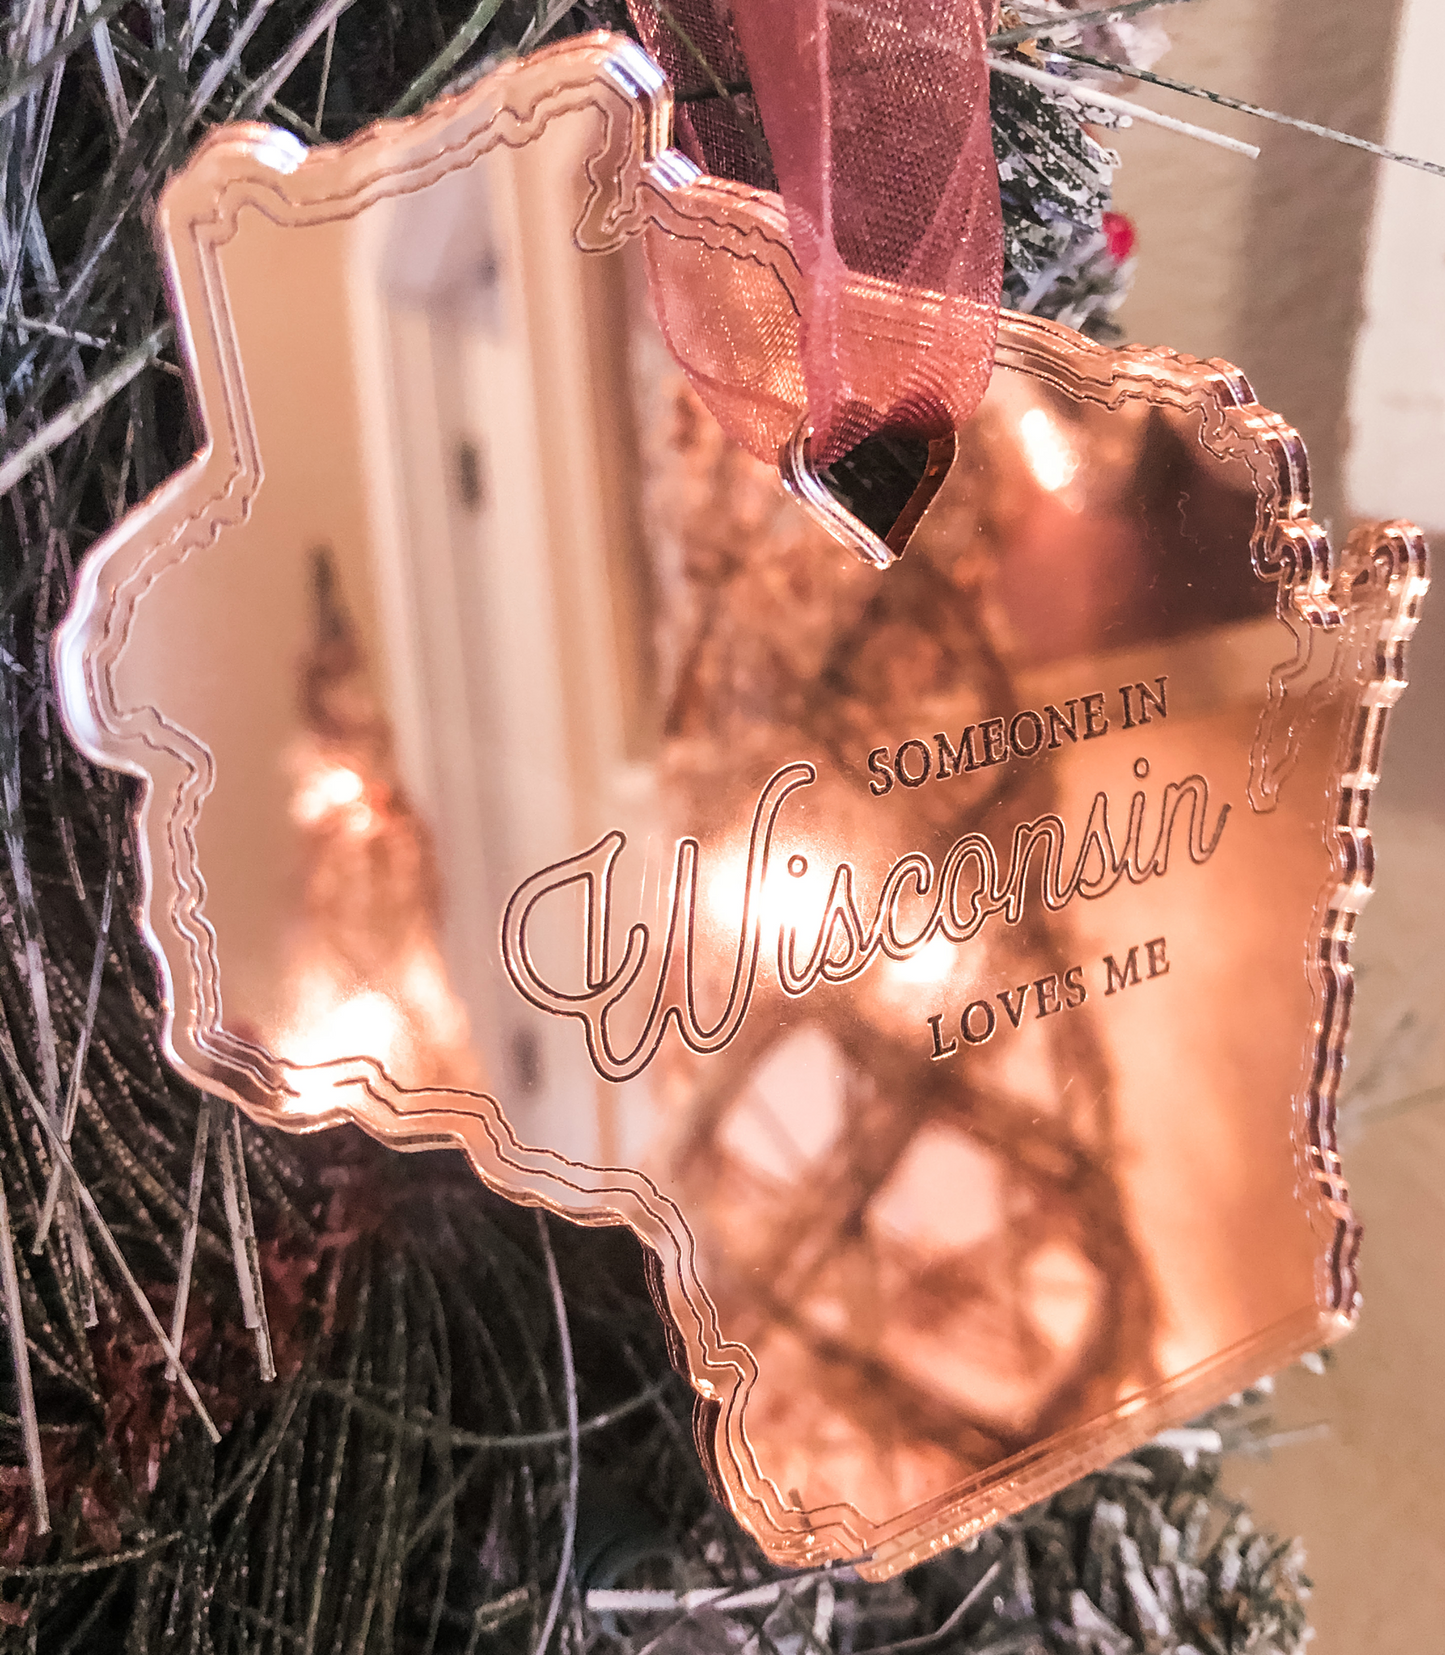 Someone  in Wisconsin loves me rose gold ornament